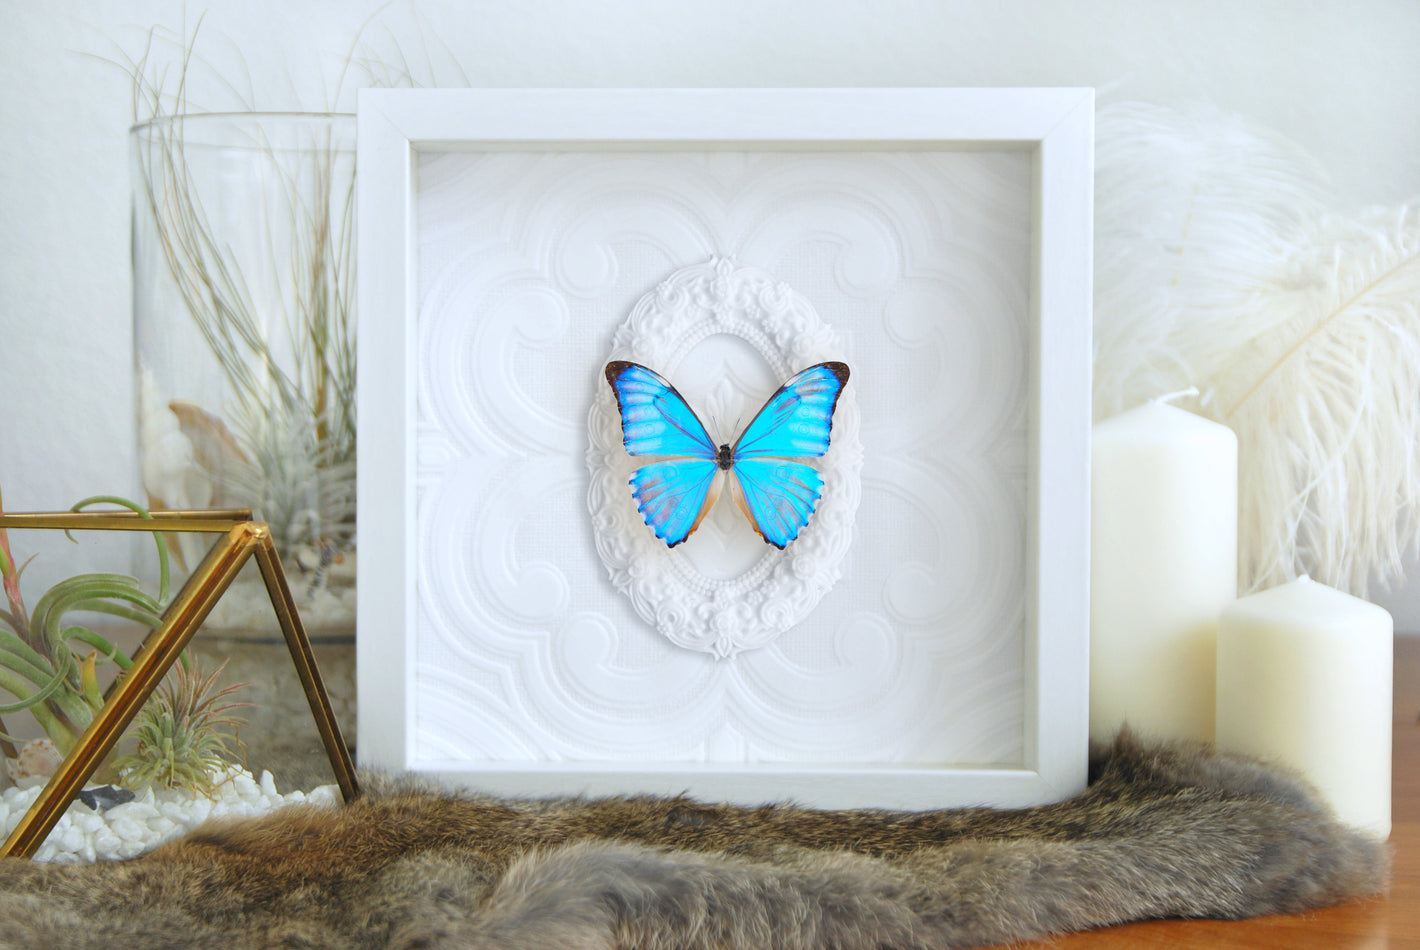 Deluxe framed Morpho aurora butterfly taxidermy